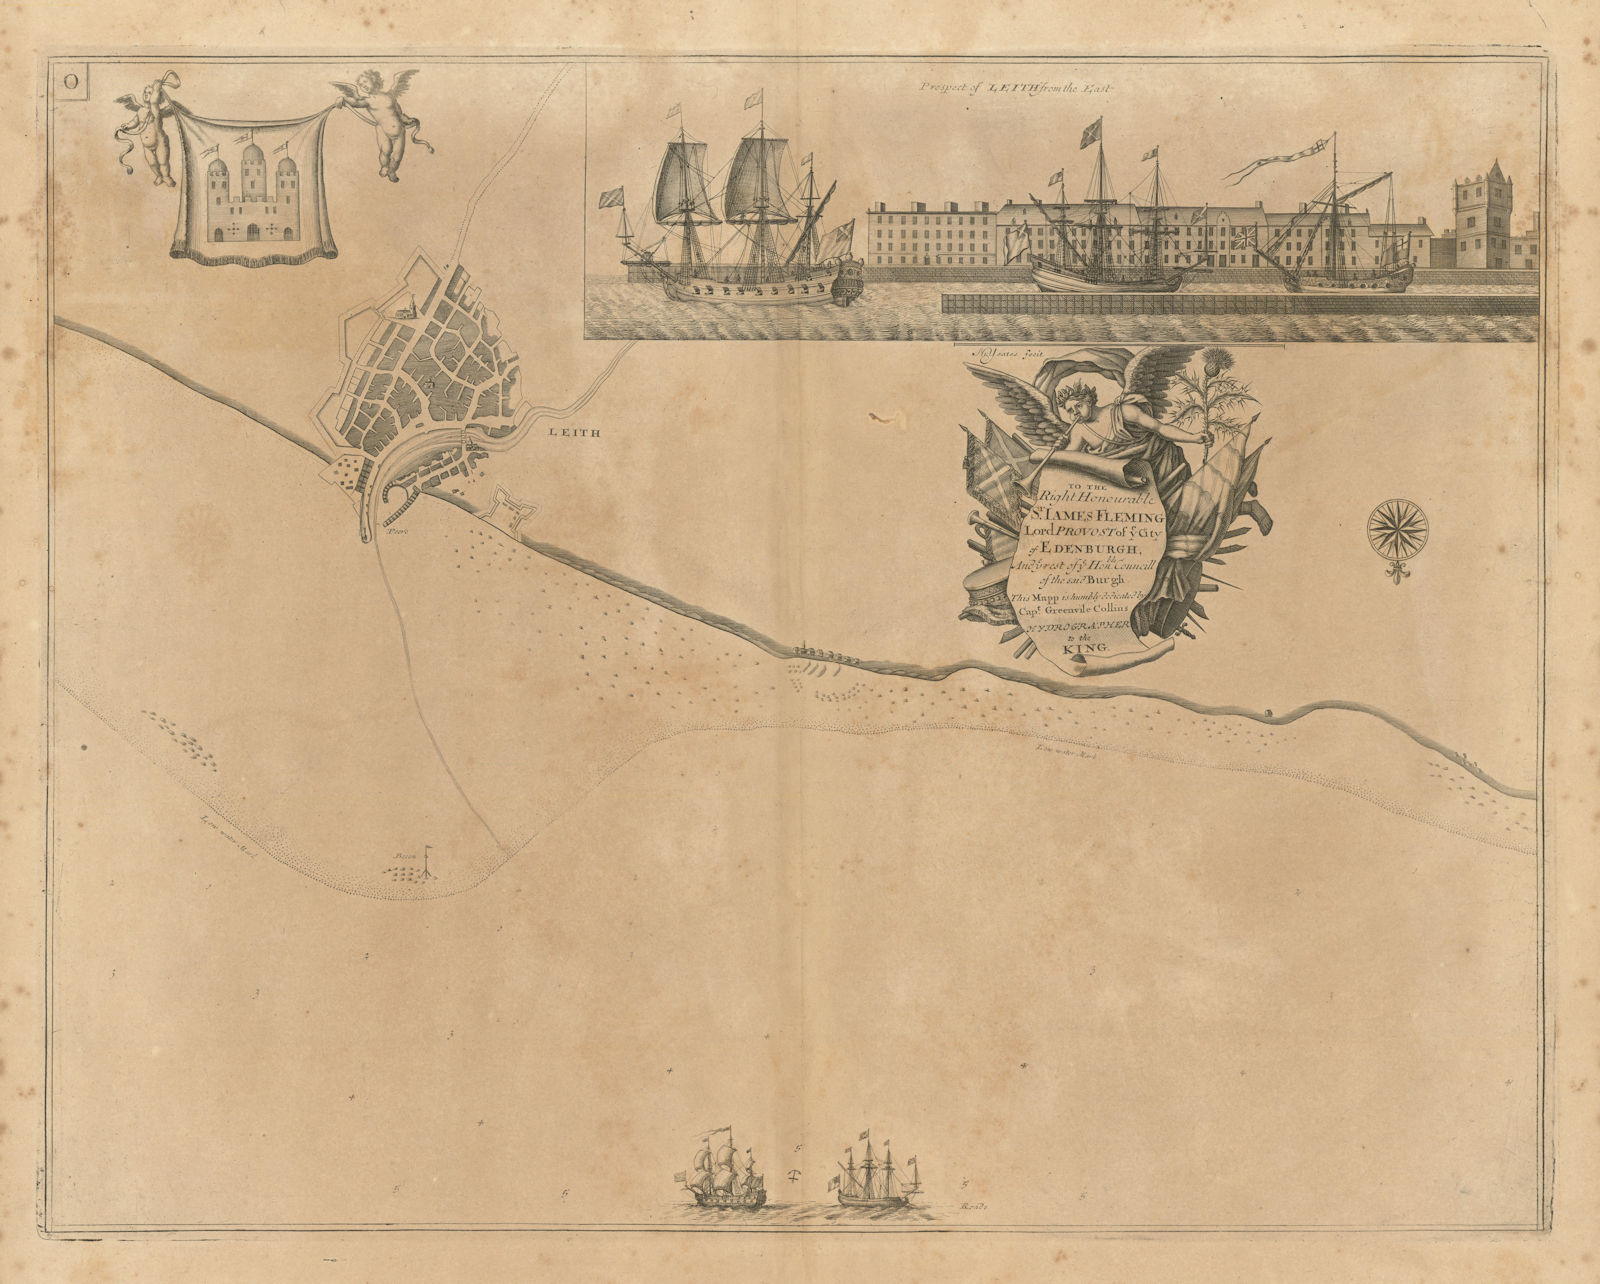 Navigation chart & view of LEITH, by Capt Greenvile COLLINS. Edinburgh 1693 map